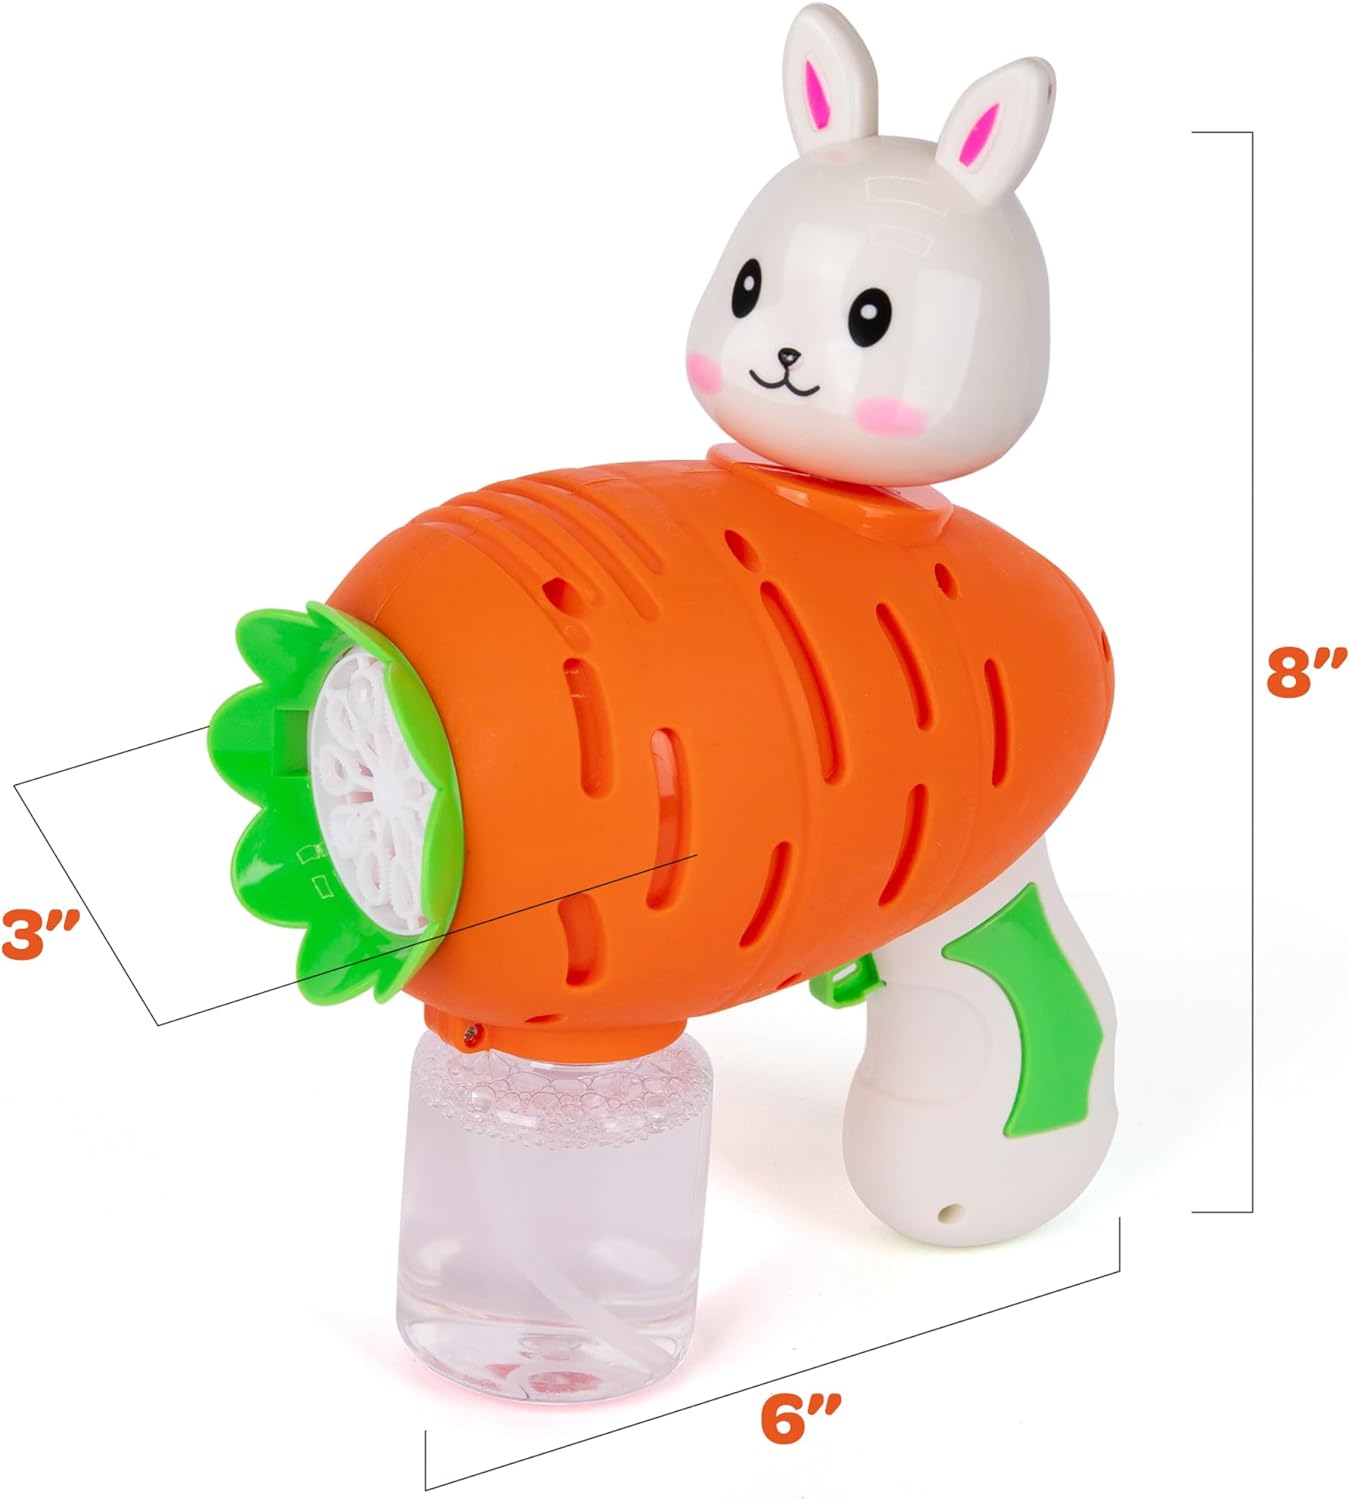 Easter Bubble Gun for Kids - Carrot-Shaped Bubble Gun with 100ml of Bubble Solution